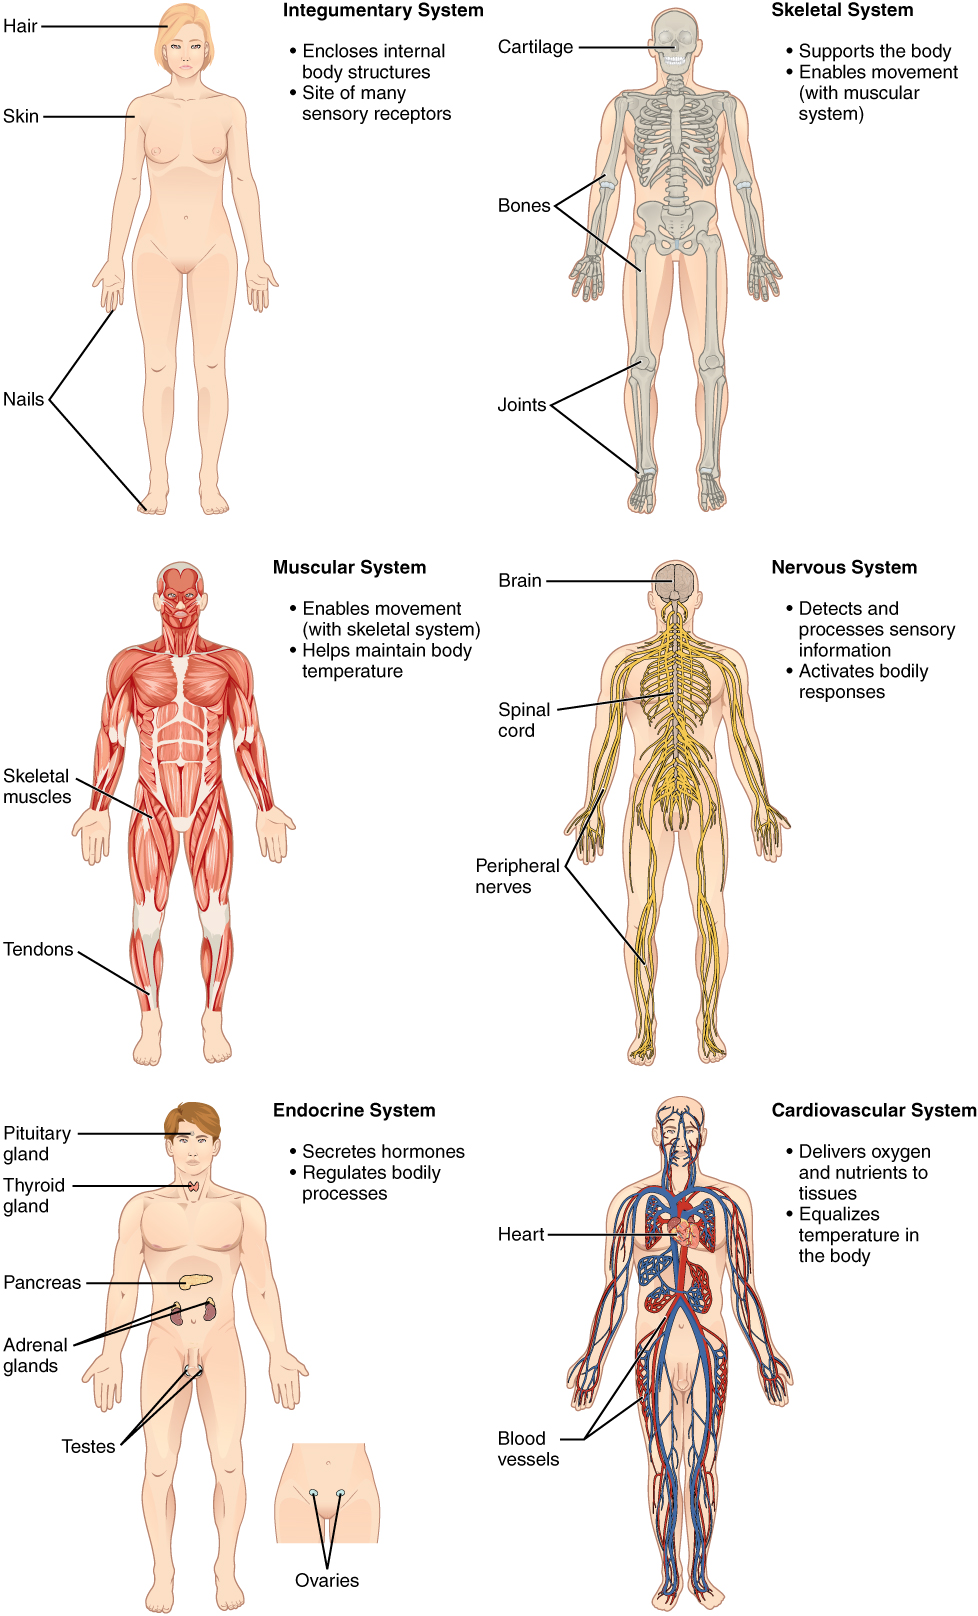 Organ systems of the human body. Image description available.